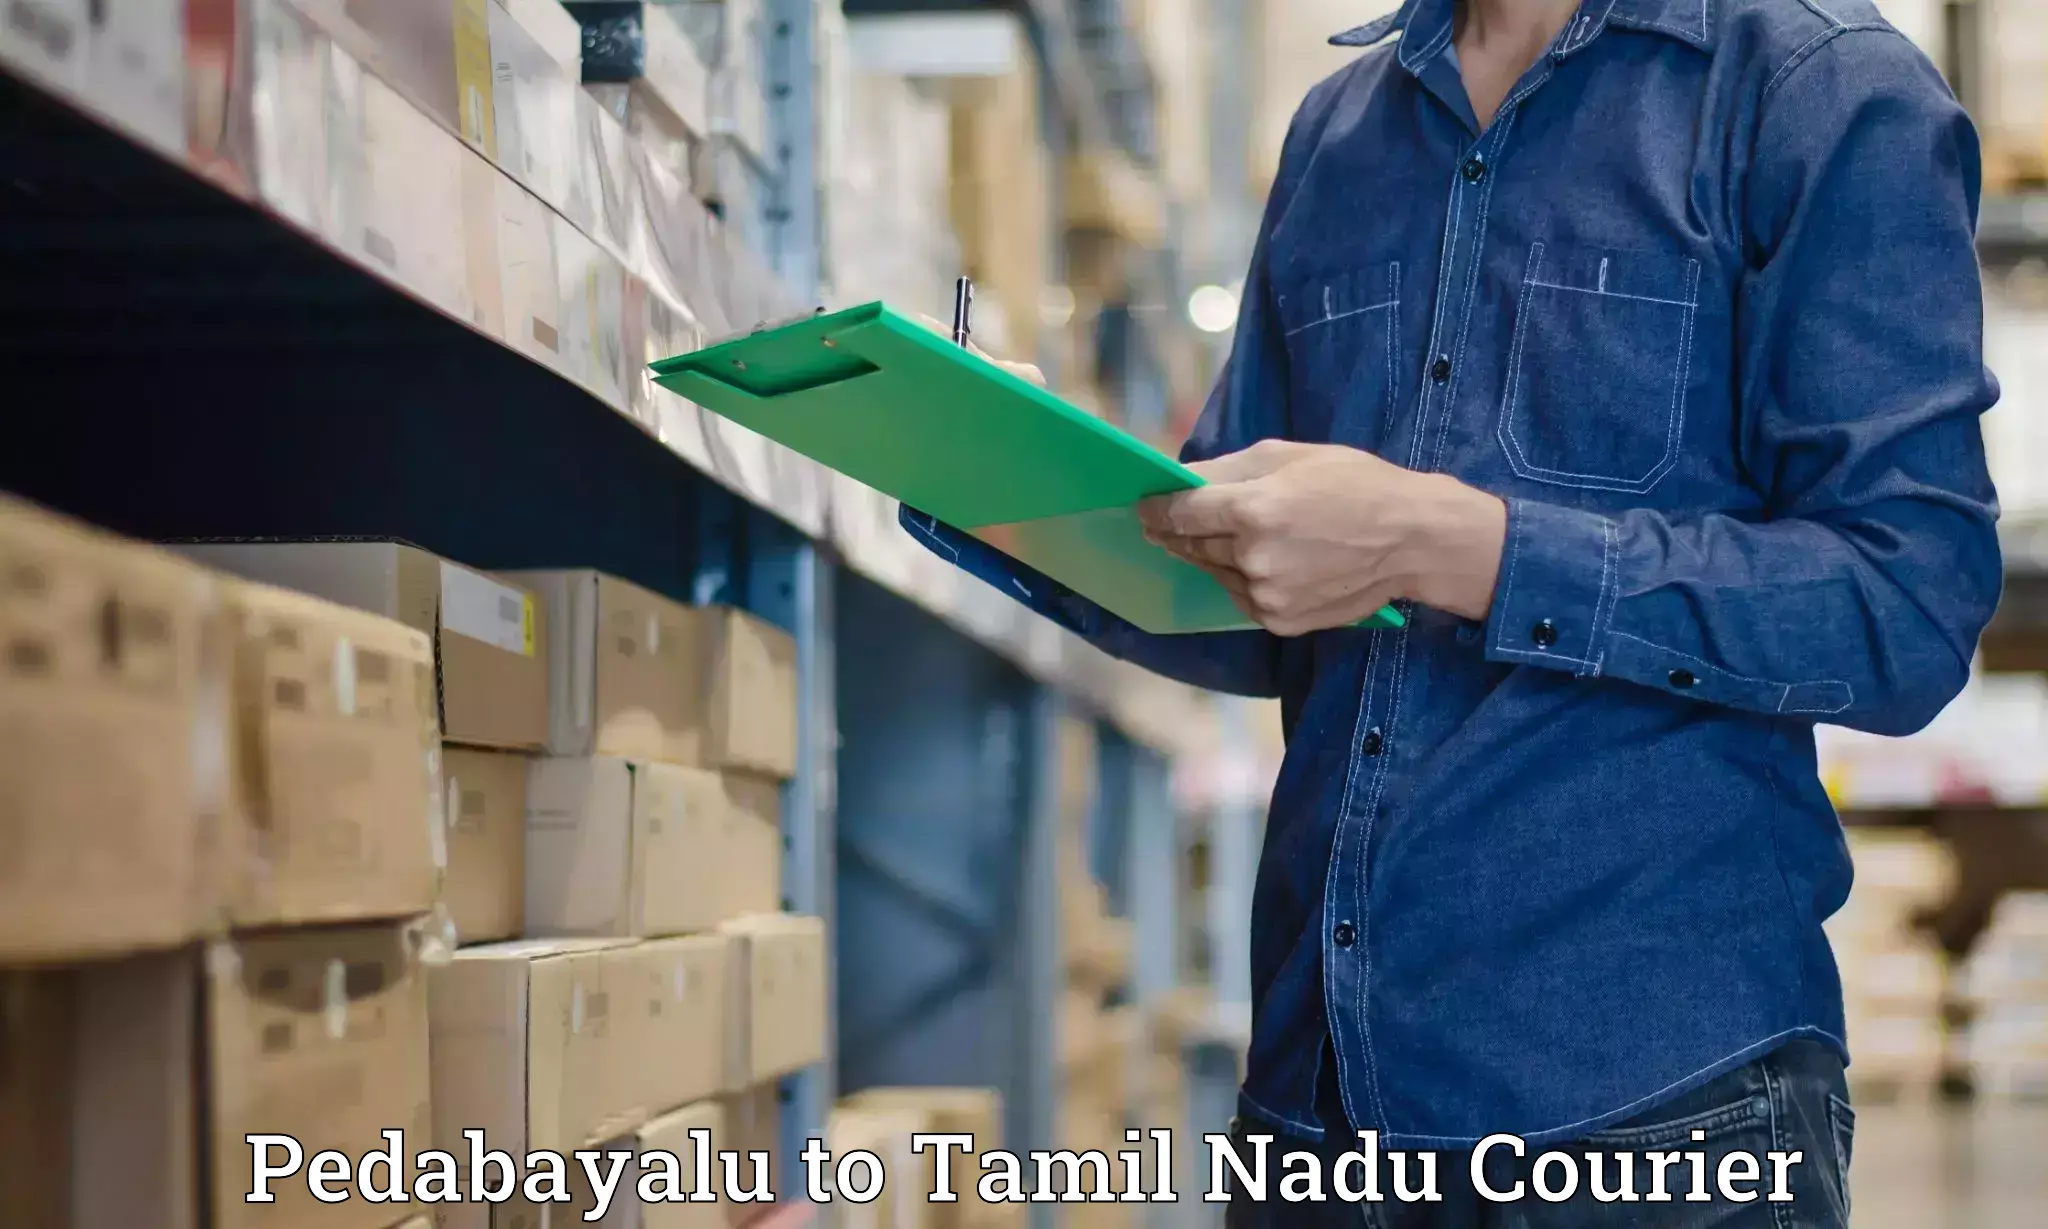 Large package courier Pedabayalu to Vallioor